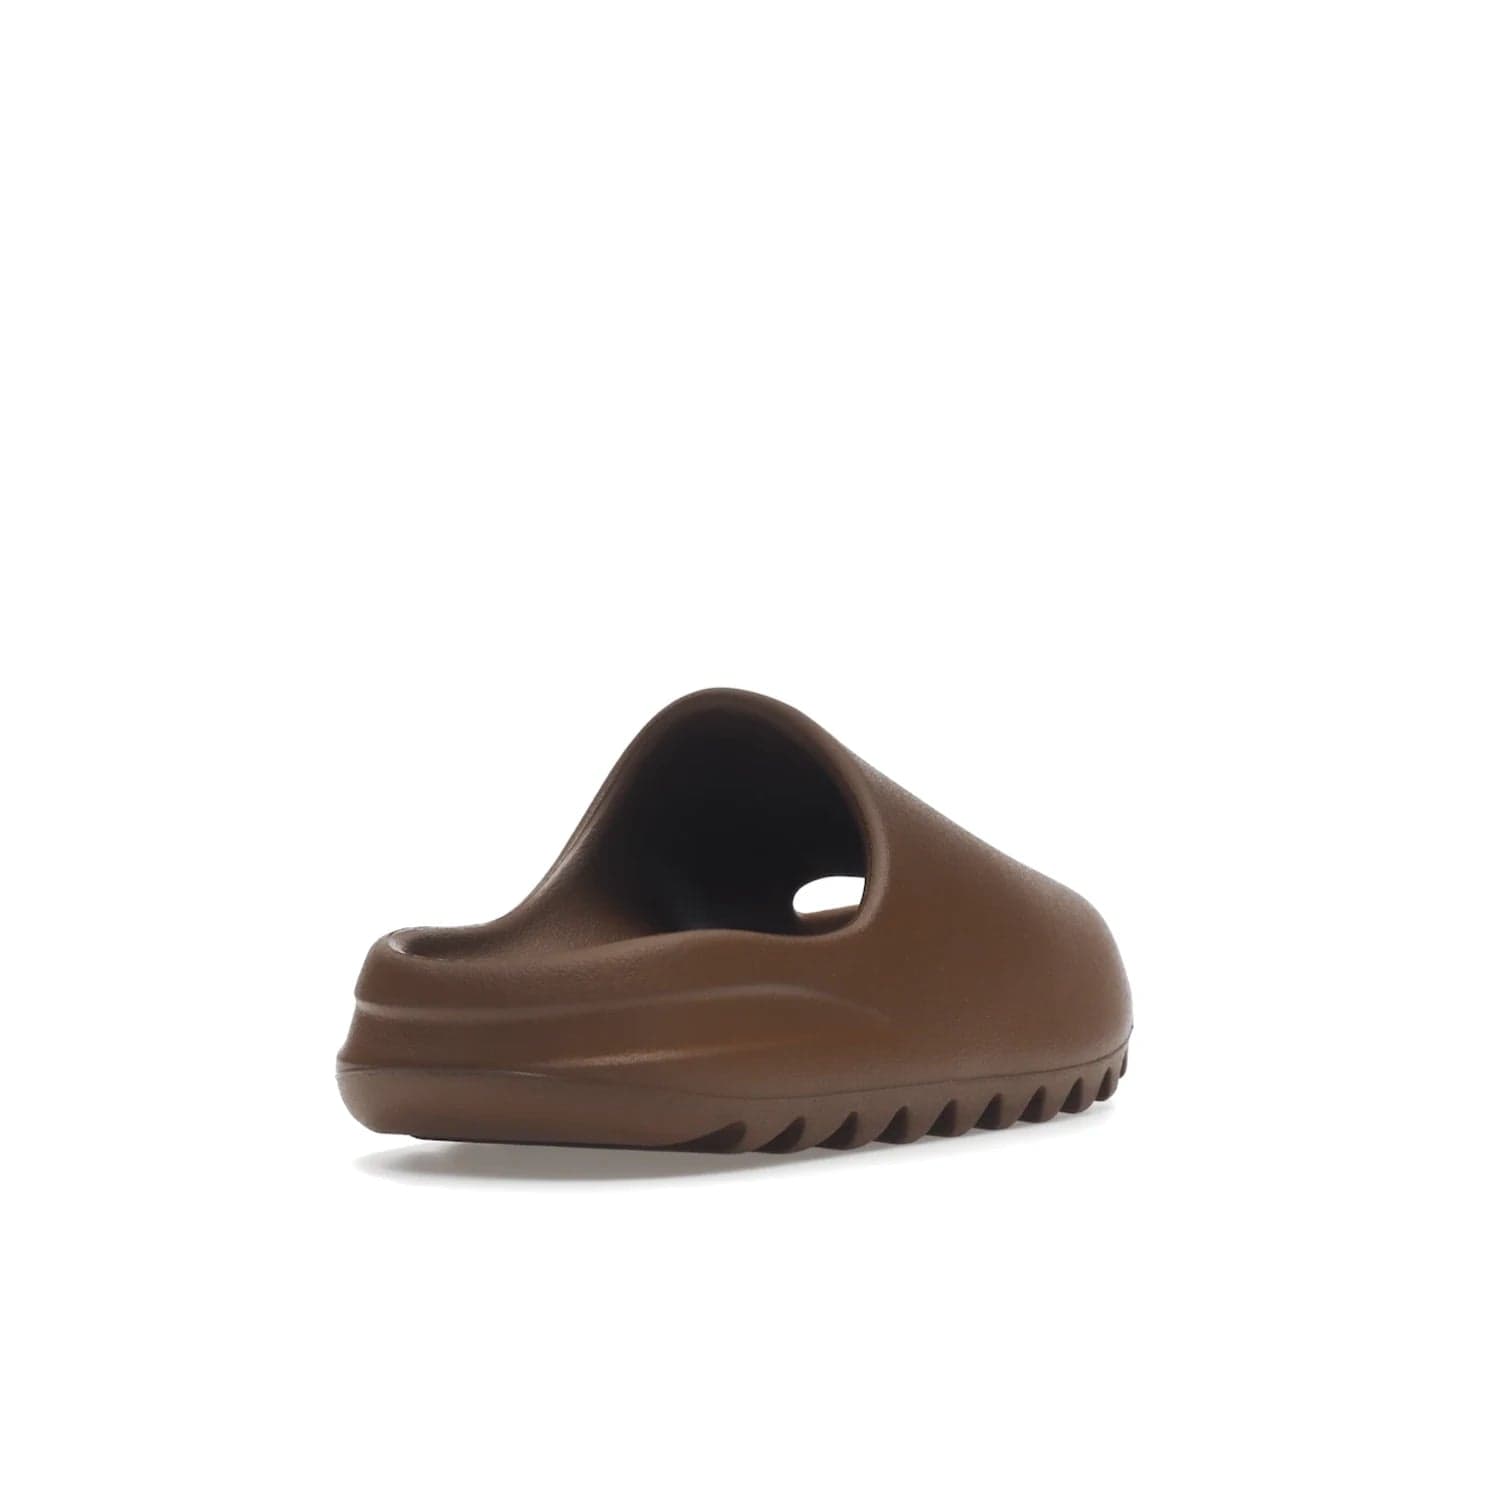 adidas Yeezy Slide Flax - Image 31 - Only at www.BallersClubKickz.com - Score the perfect casual look with the adidas Yeezy Slide Flax. Made with lightweight injected EVA plus horizontal grooves underfoot for traction. Release on August 22, 2022. $70.